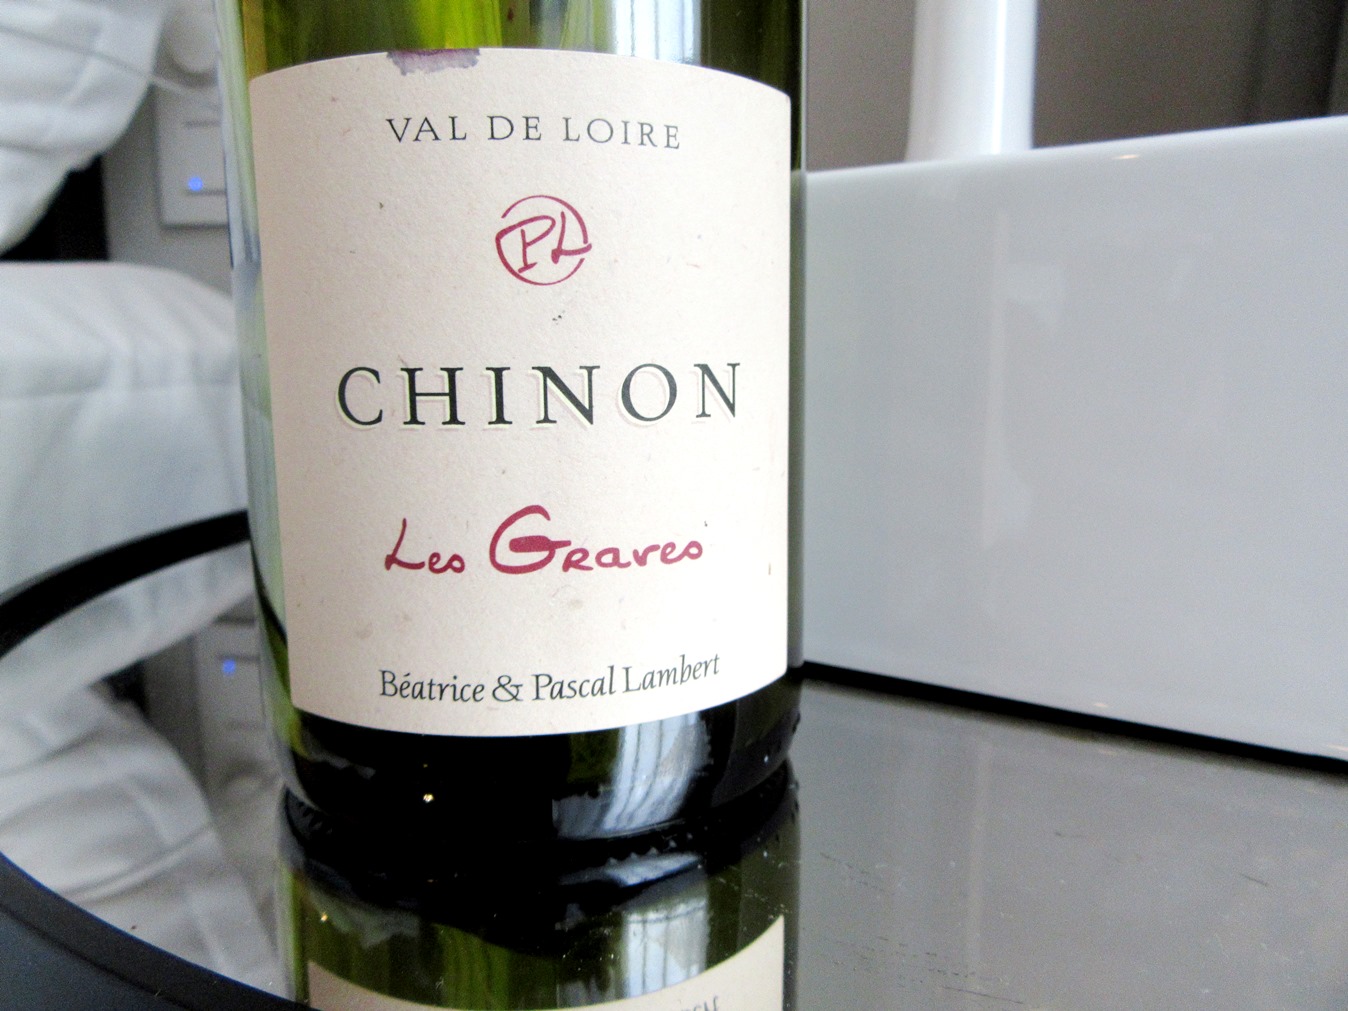 Beatrice & Pascal Lambert, Les Graves Chinon 2014, Loire, France, Wine Casual